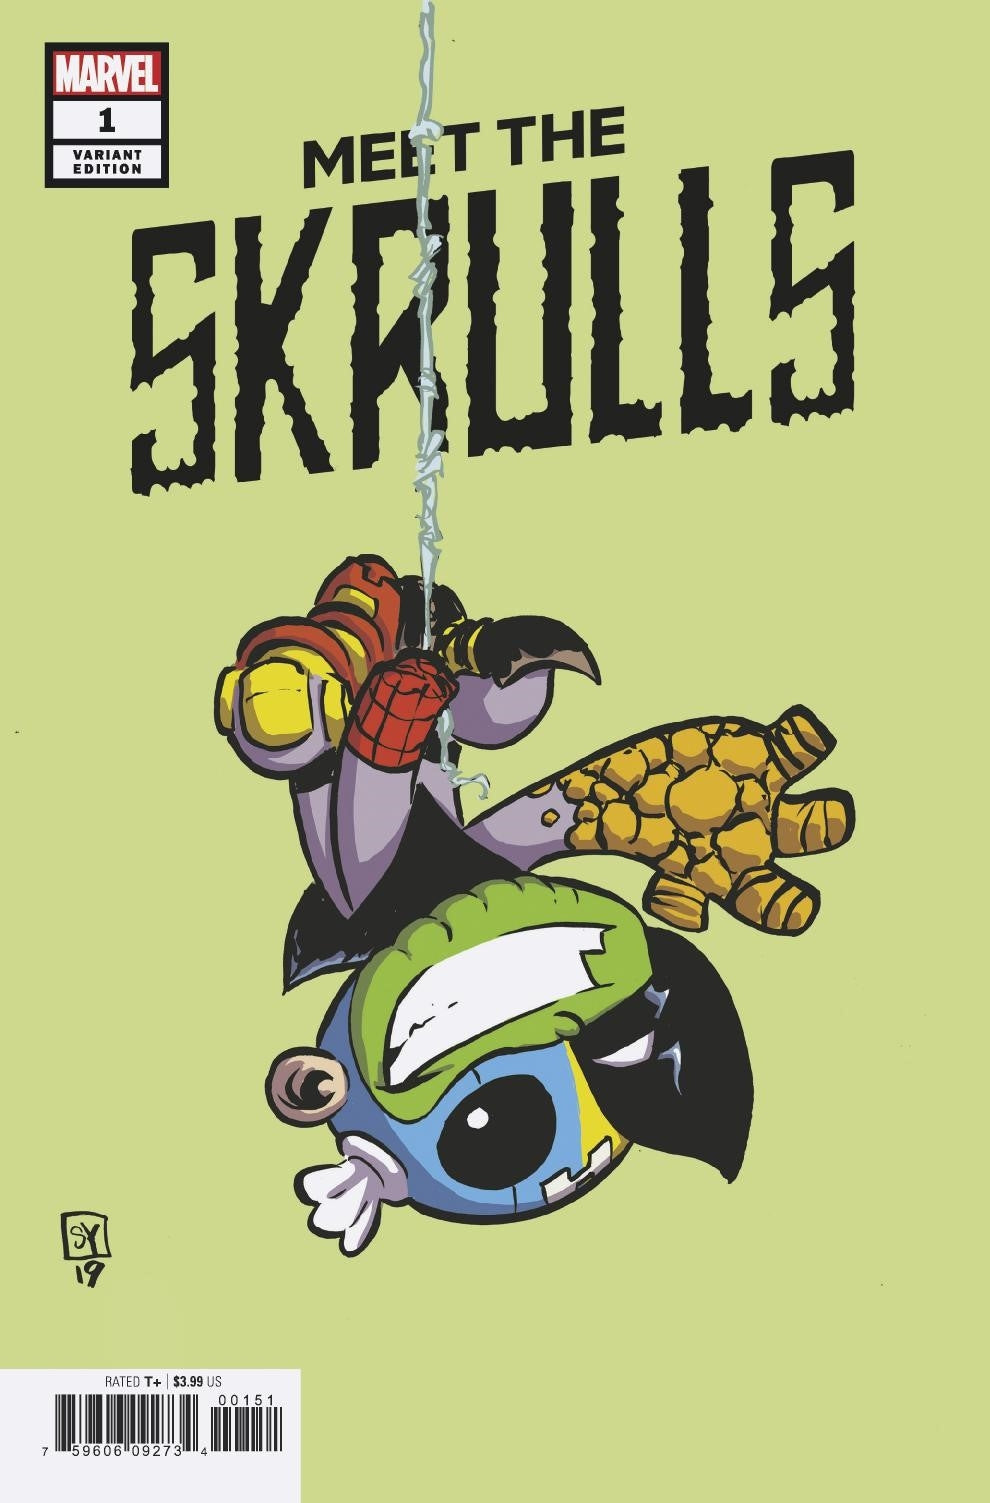 MEET THE SKRULLS #1 (OF 5) YOUNG VAR COVER